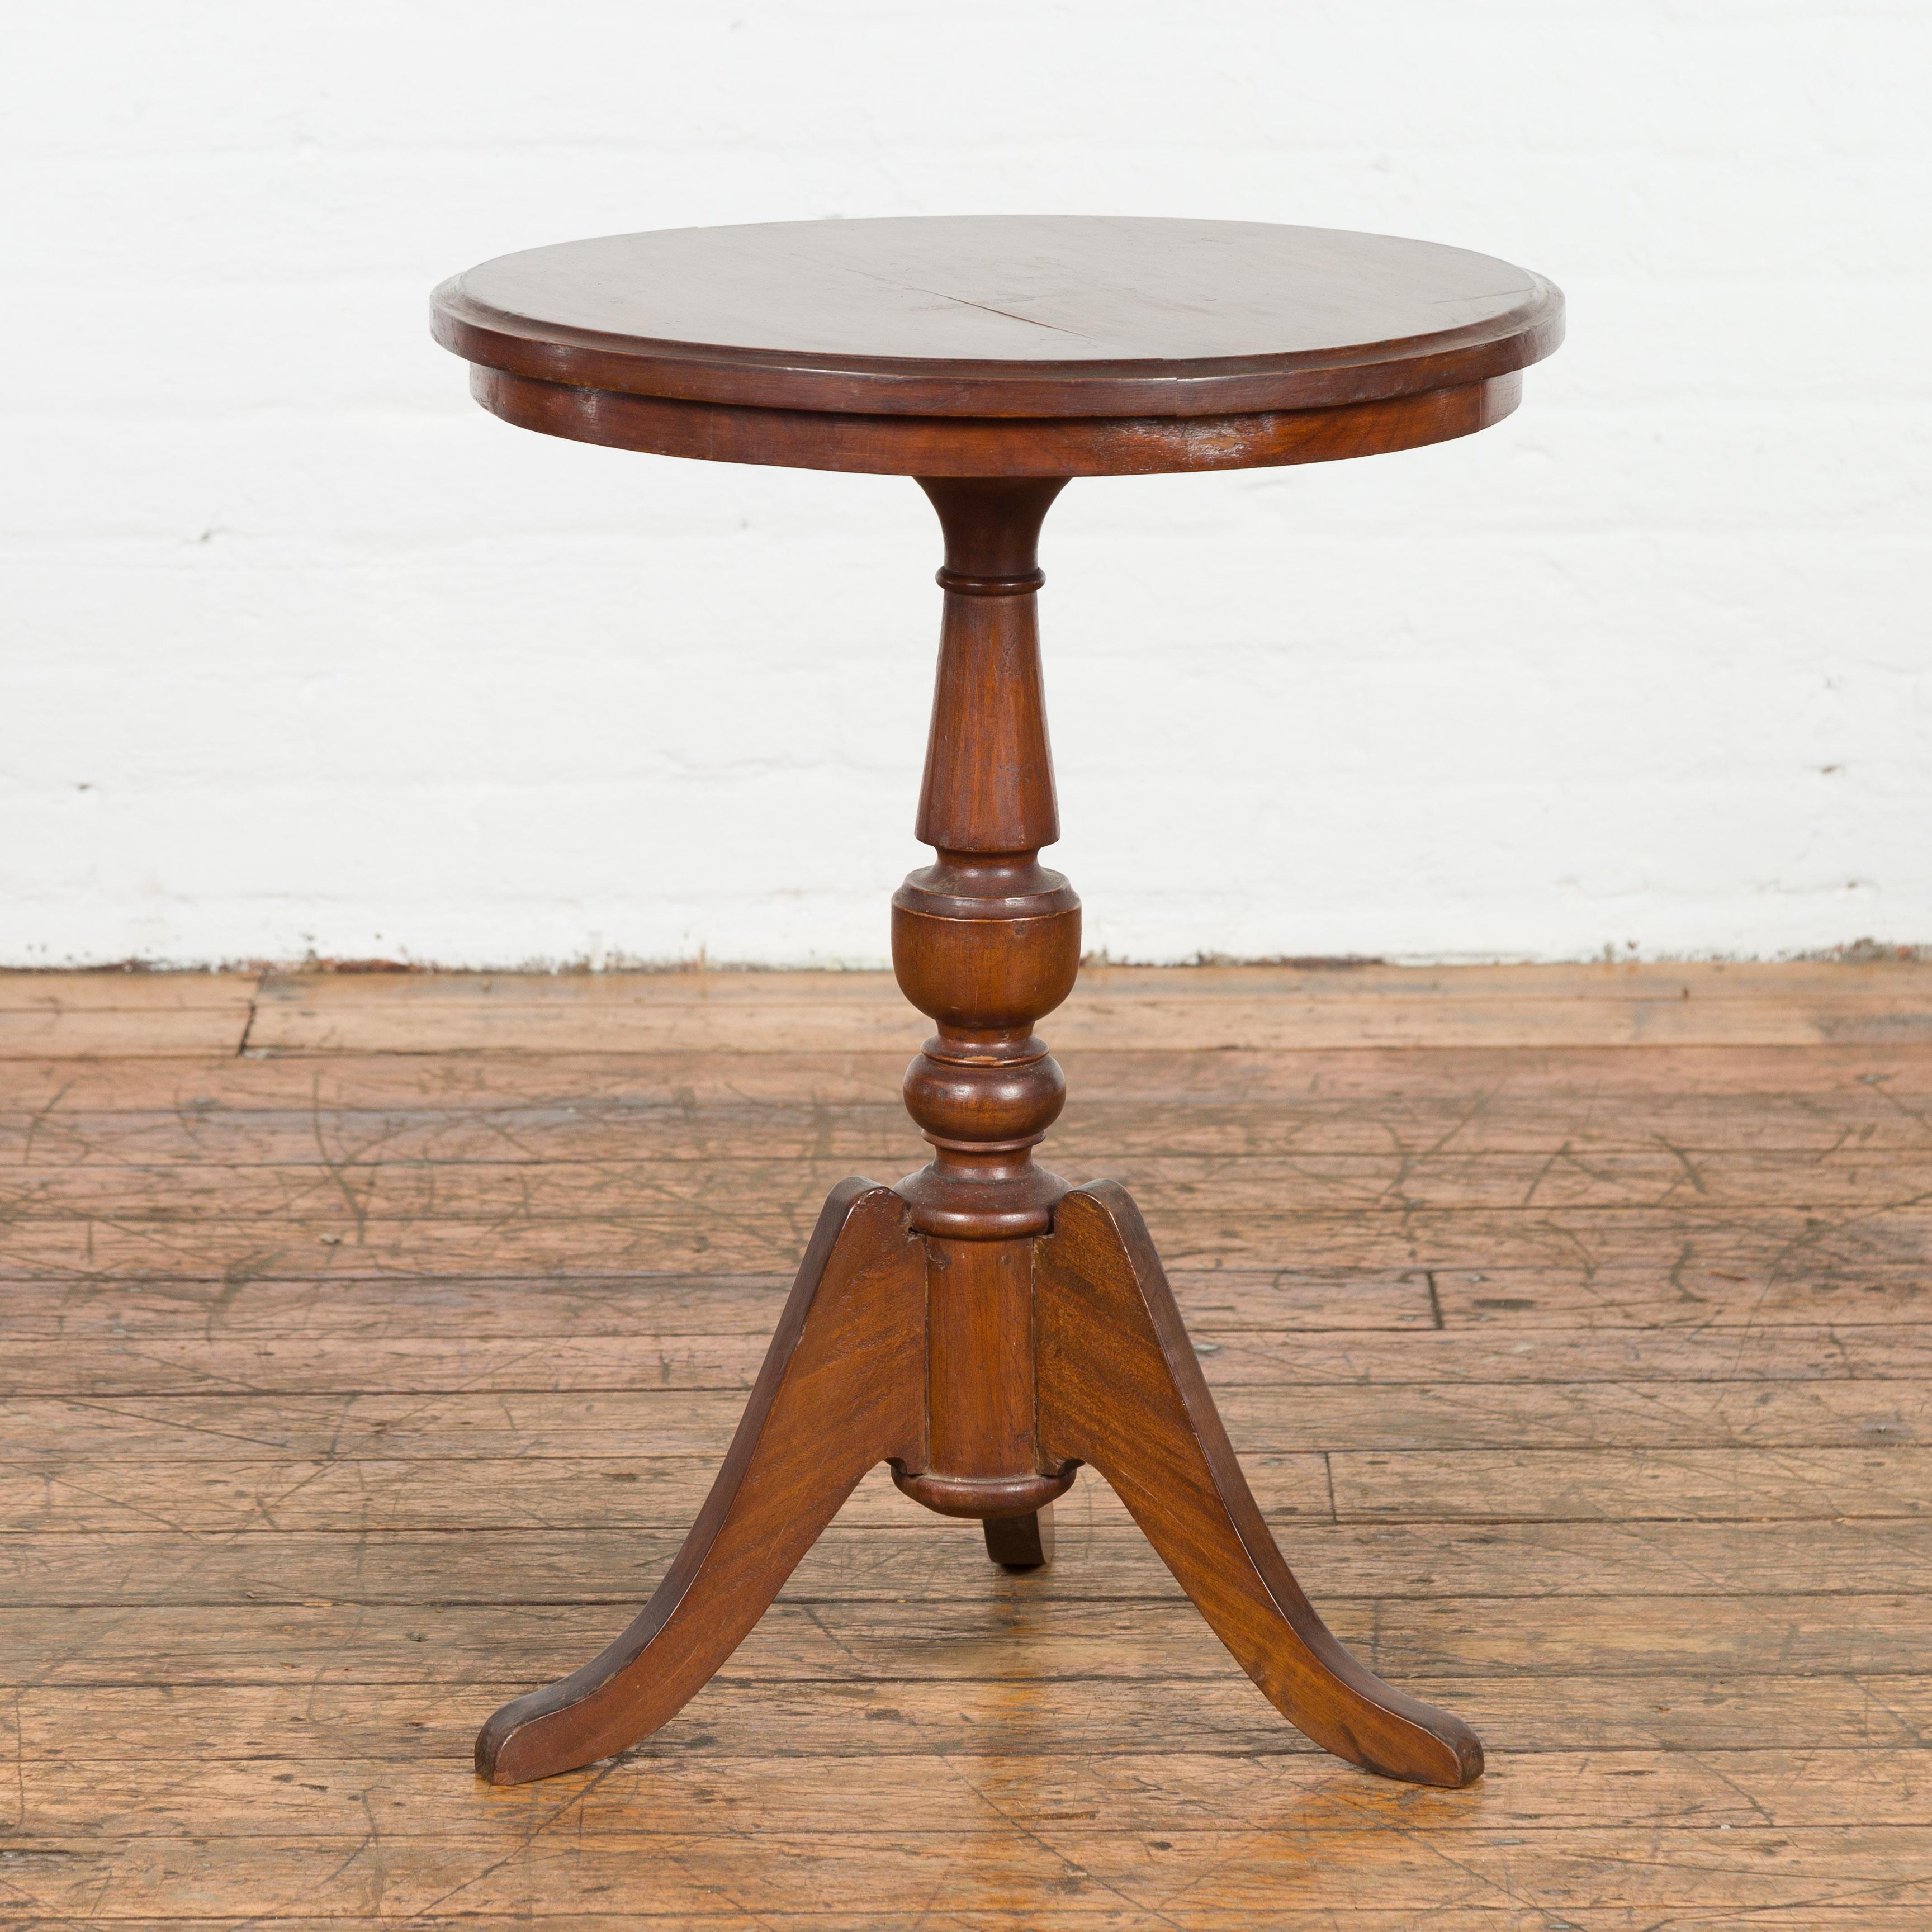 A Javanese wooden guéridon side table from the early 20th century, with circular top, turned pedestal and tripod base. Created on the island of Java during the early years of the 20th century, this wooden accent table features a round top with